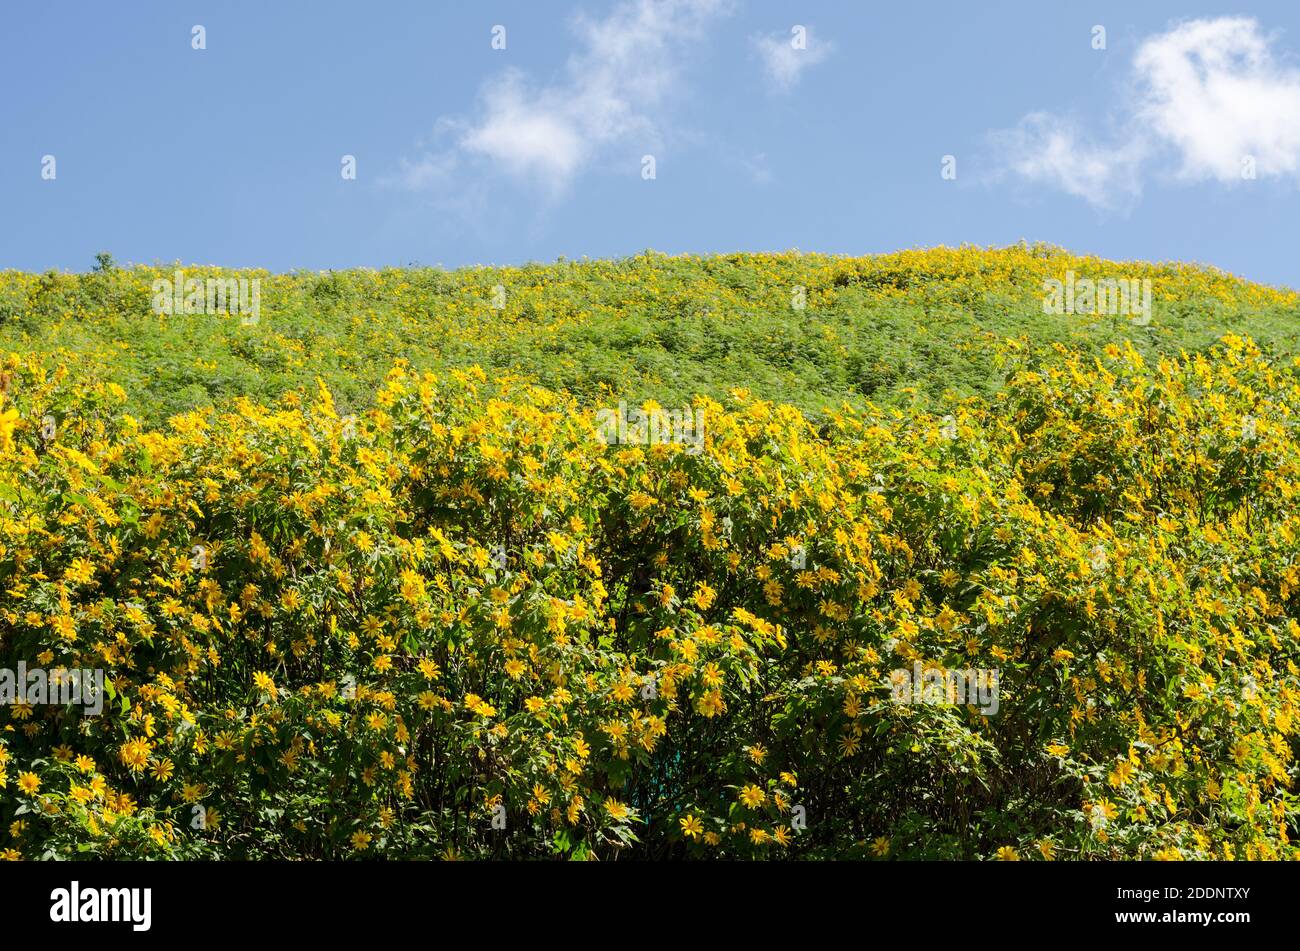 The hill of Mexican sunflower or Tung Bua Tong in Thai language at Mae Hong Son Thailand with blue sky Stock Photo